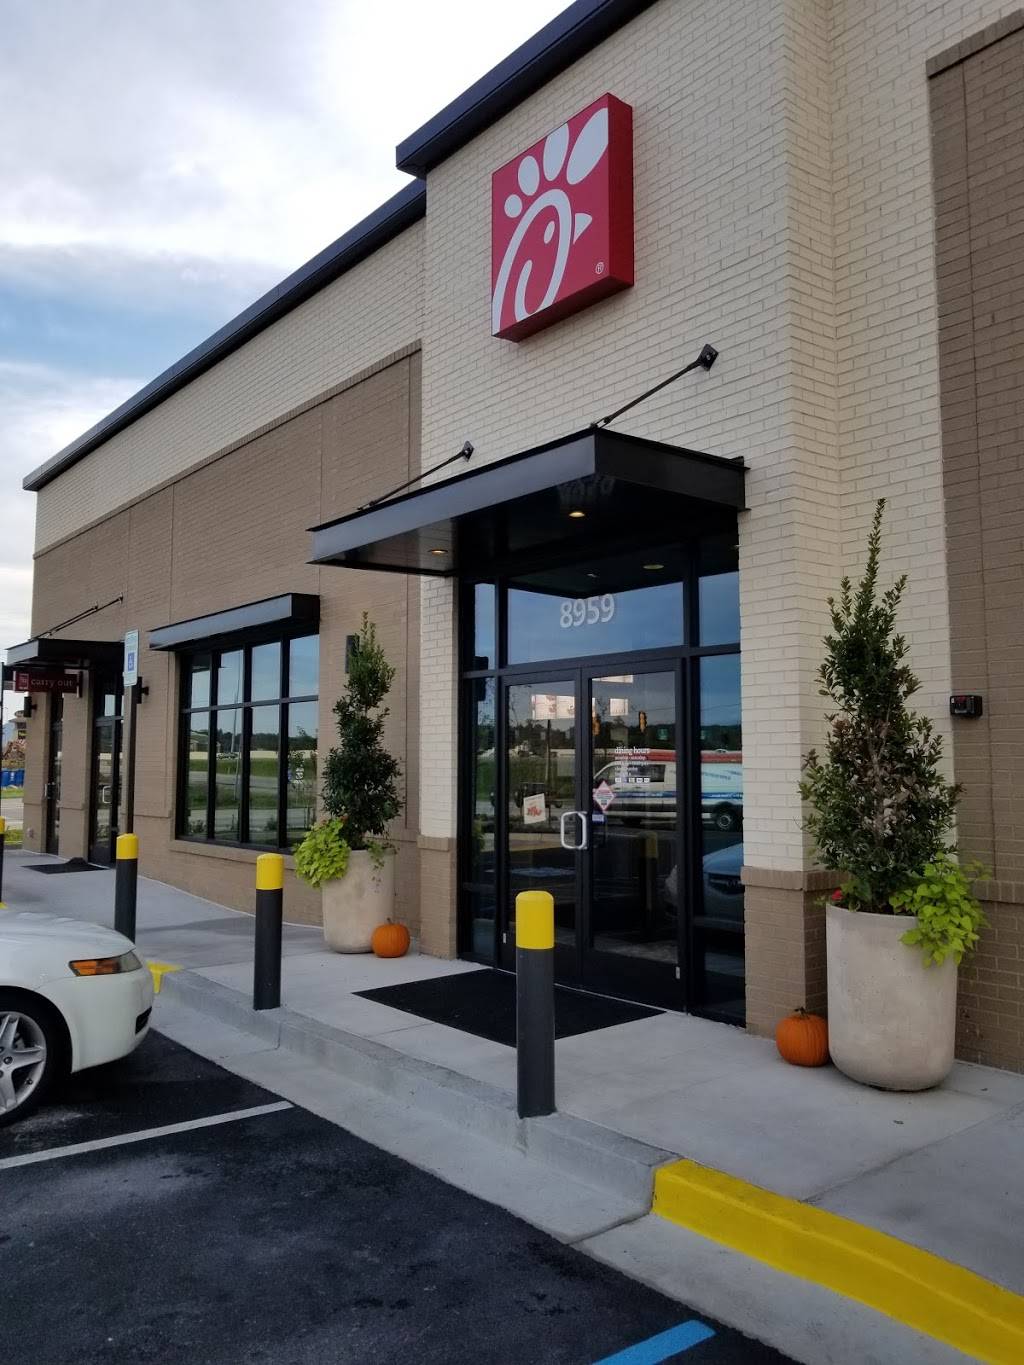 Chick-Fil-A | restaurant | 8959 Old Lee Hwy, Ooltewah, TN 37363, USA | 4232696987 OR +1 423-269-6987